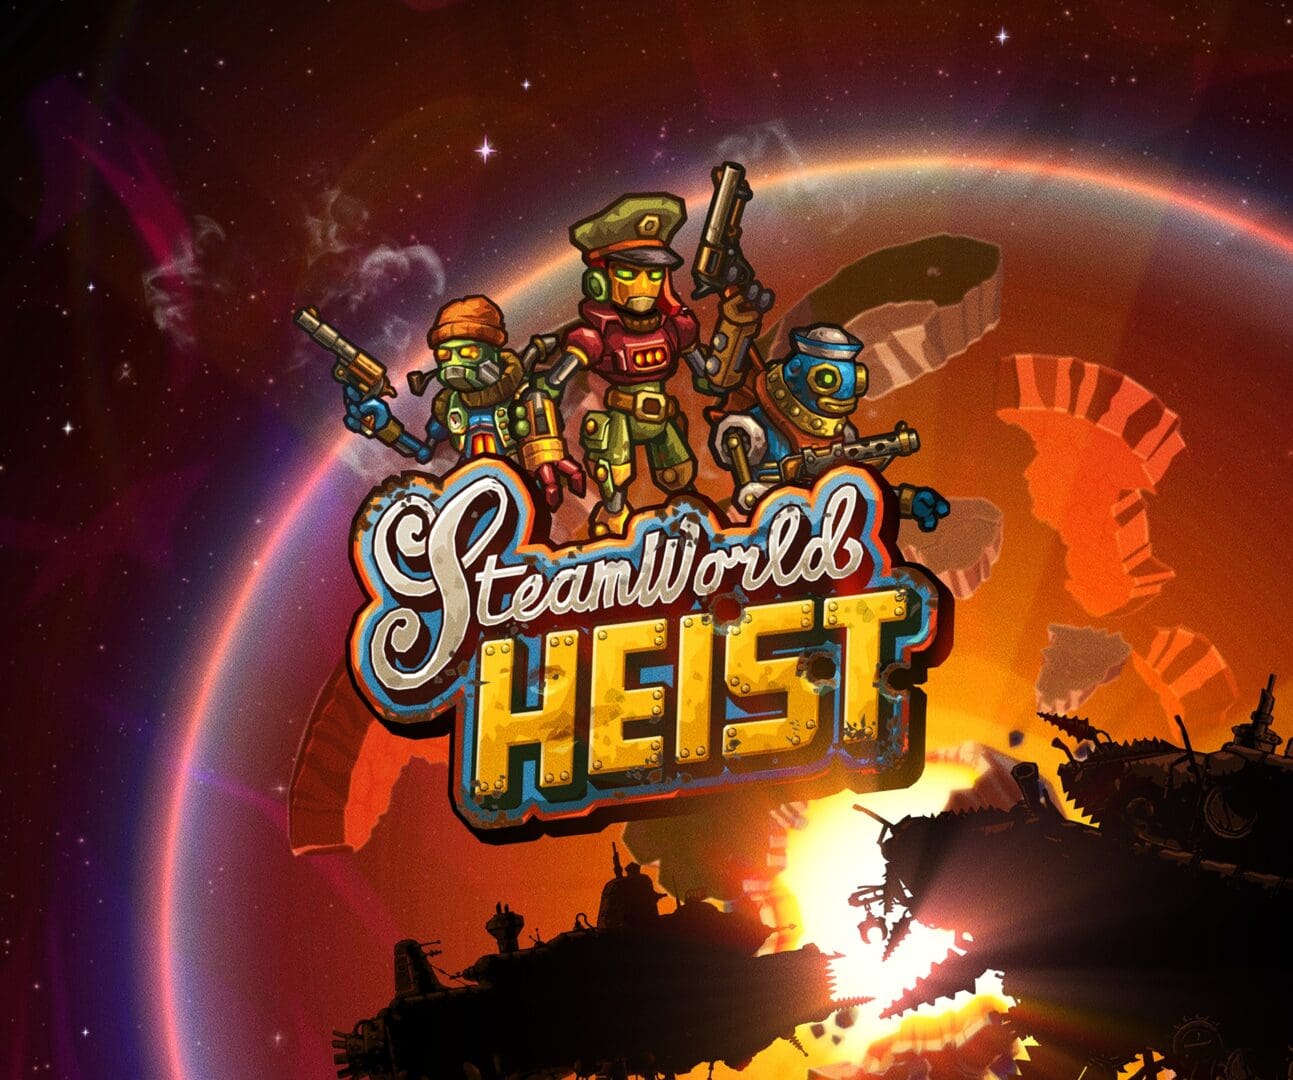 Time For Some Steam Powered Excitement with SteamWorld Heist!